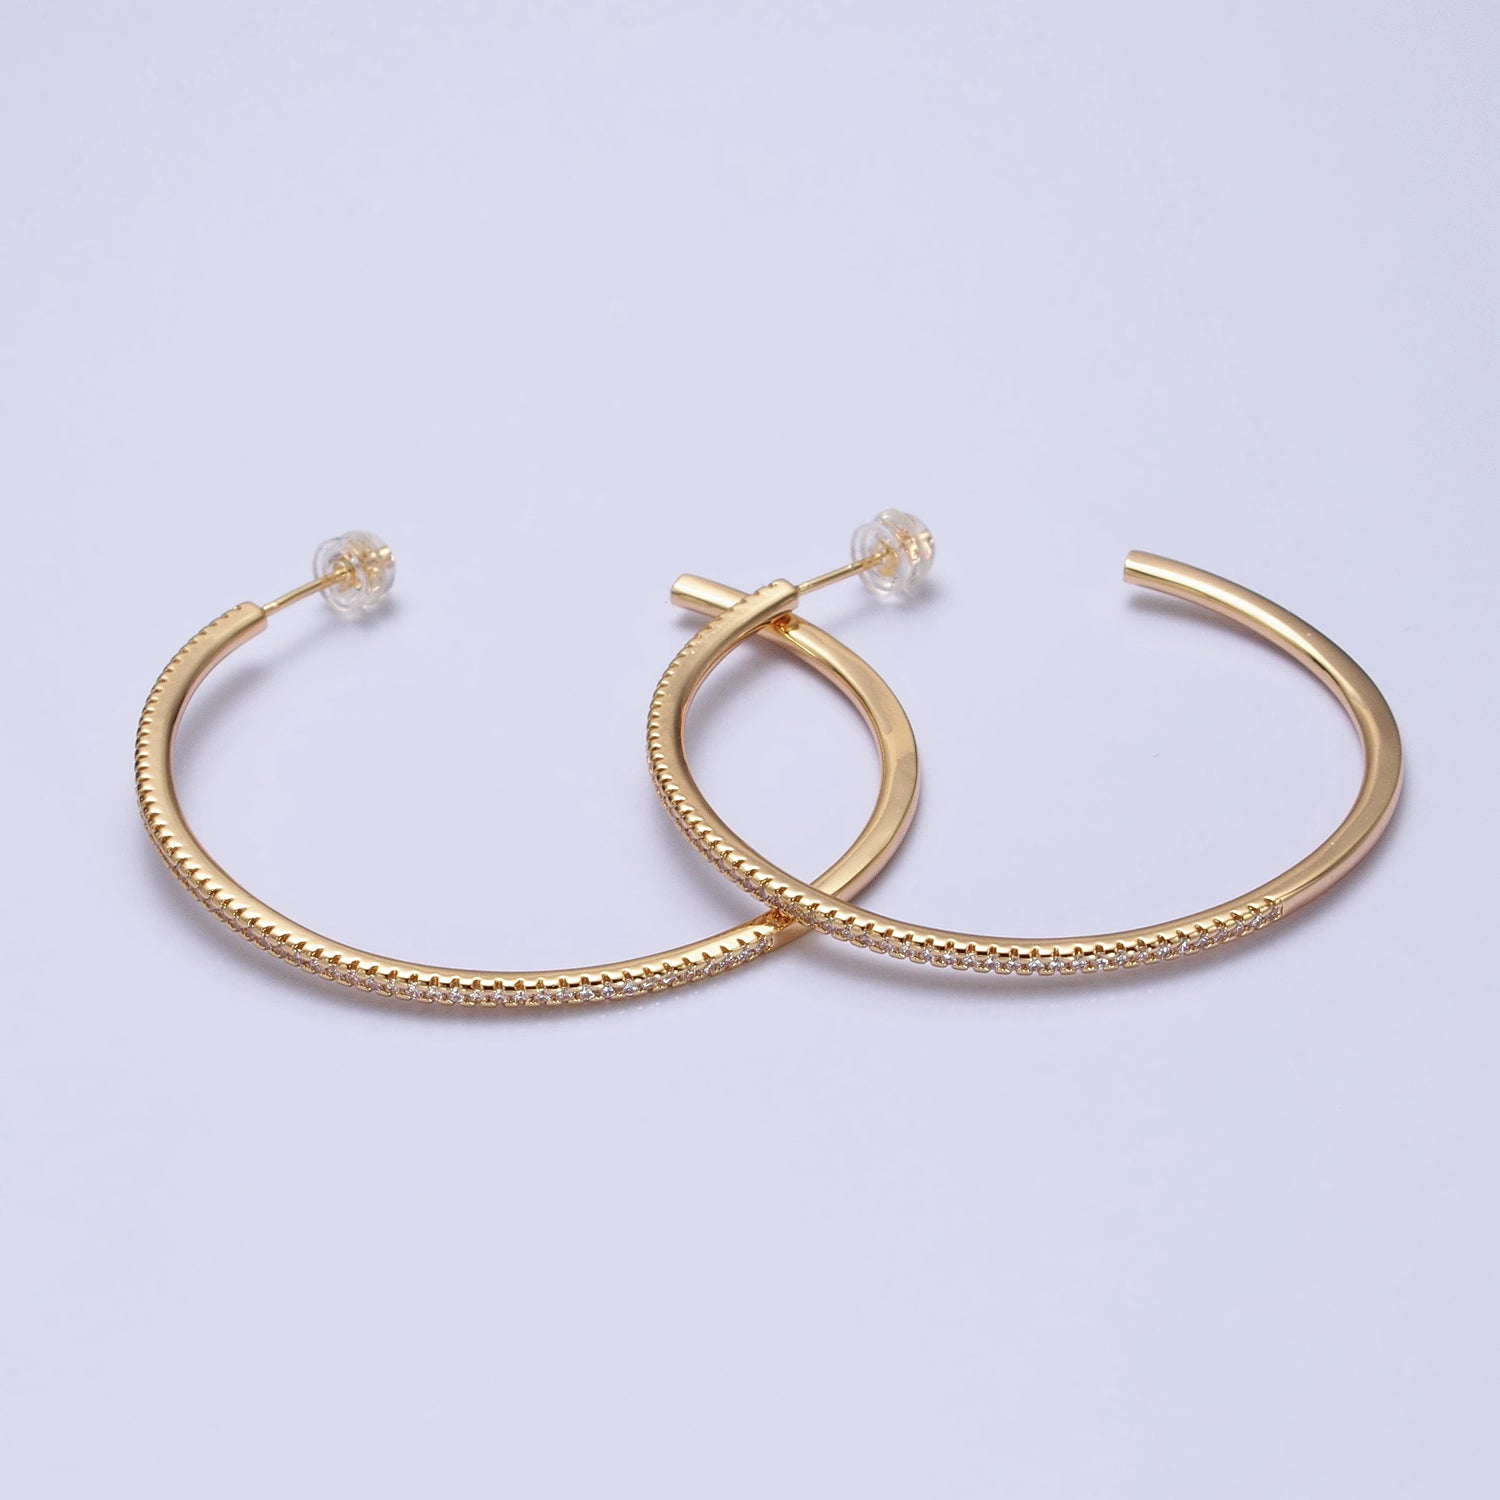 Minimalist Gold Hoop Earring with Micro Pave CZ Stone in Gold, Silver AB471 AB472 AB742 AB747